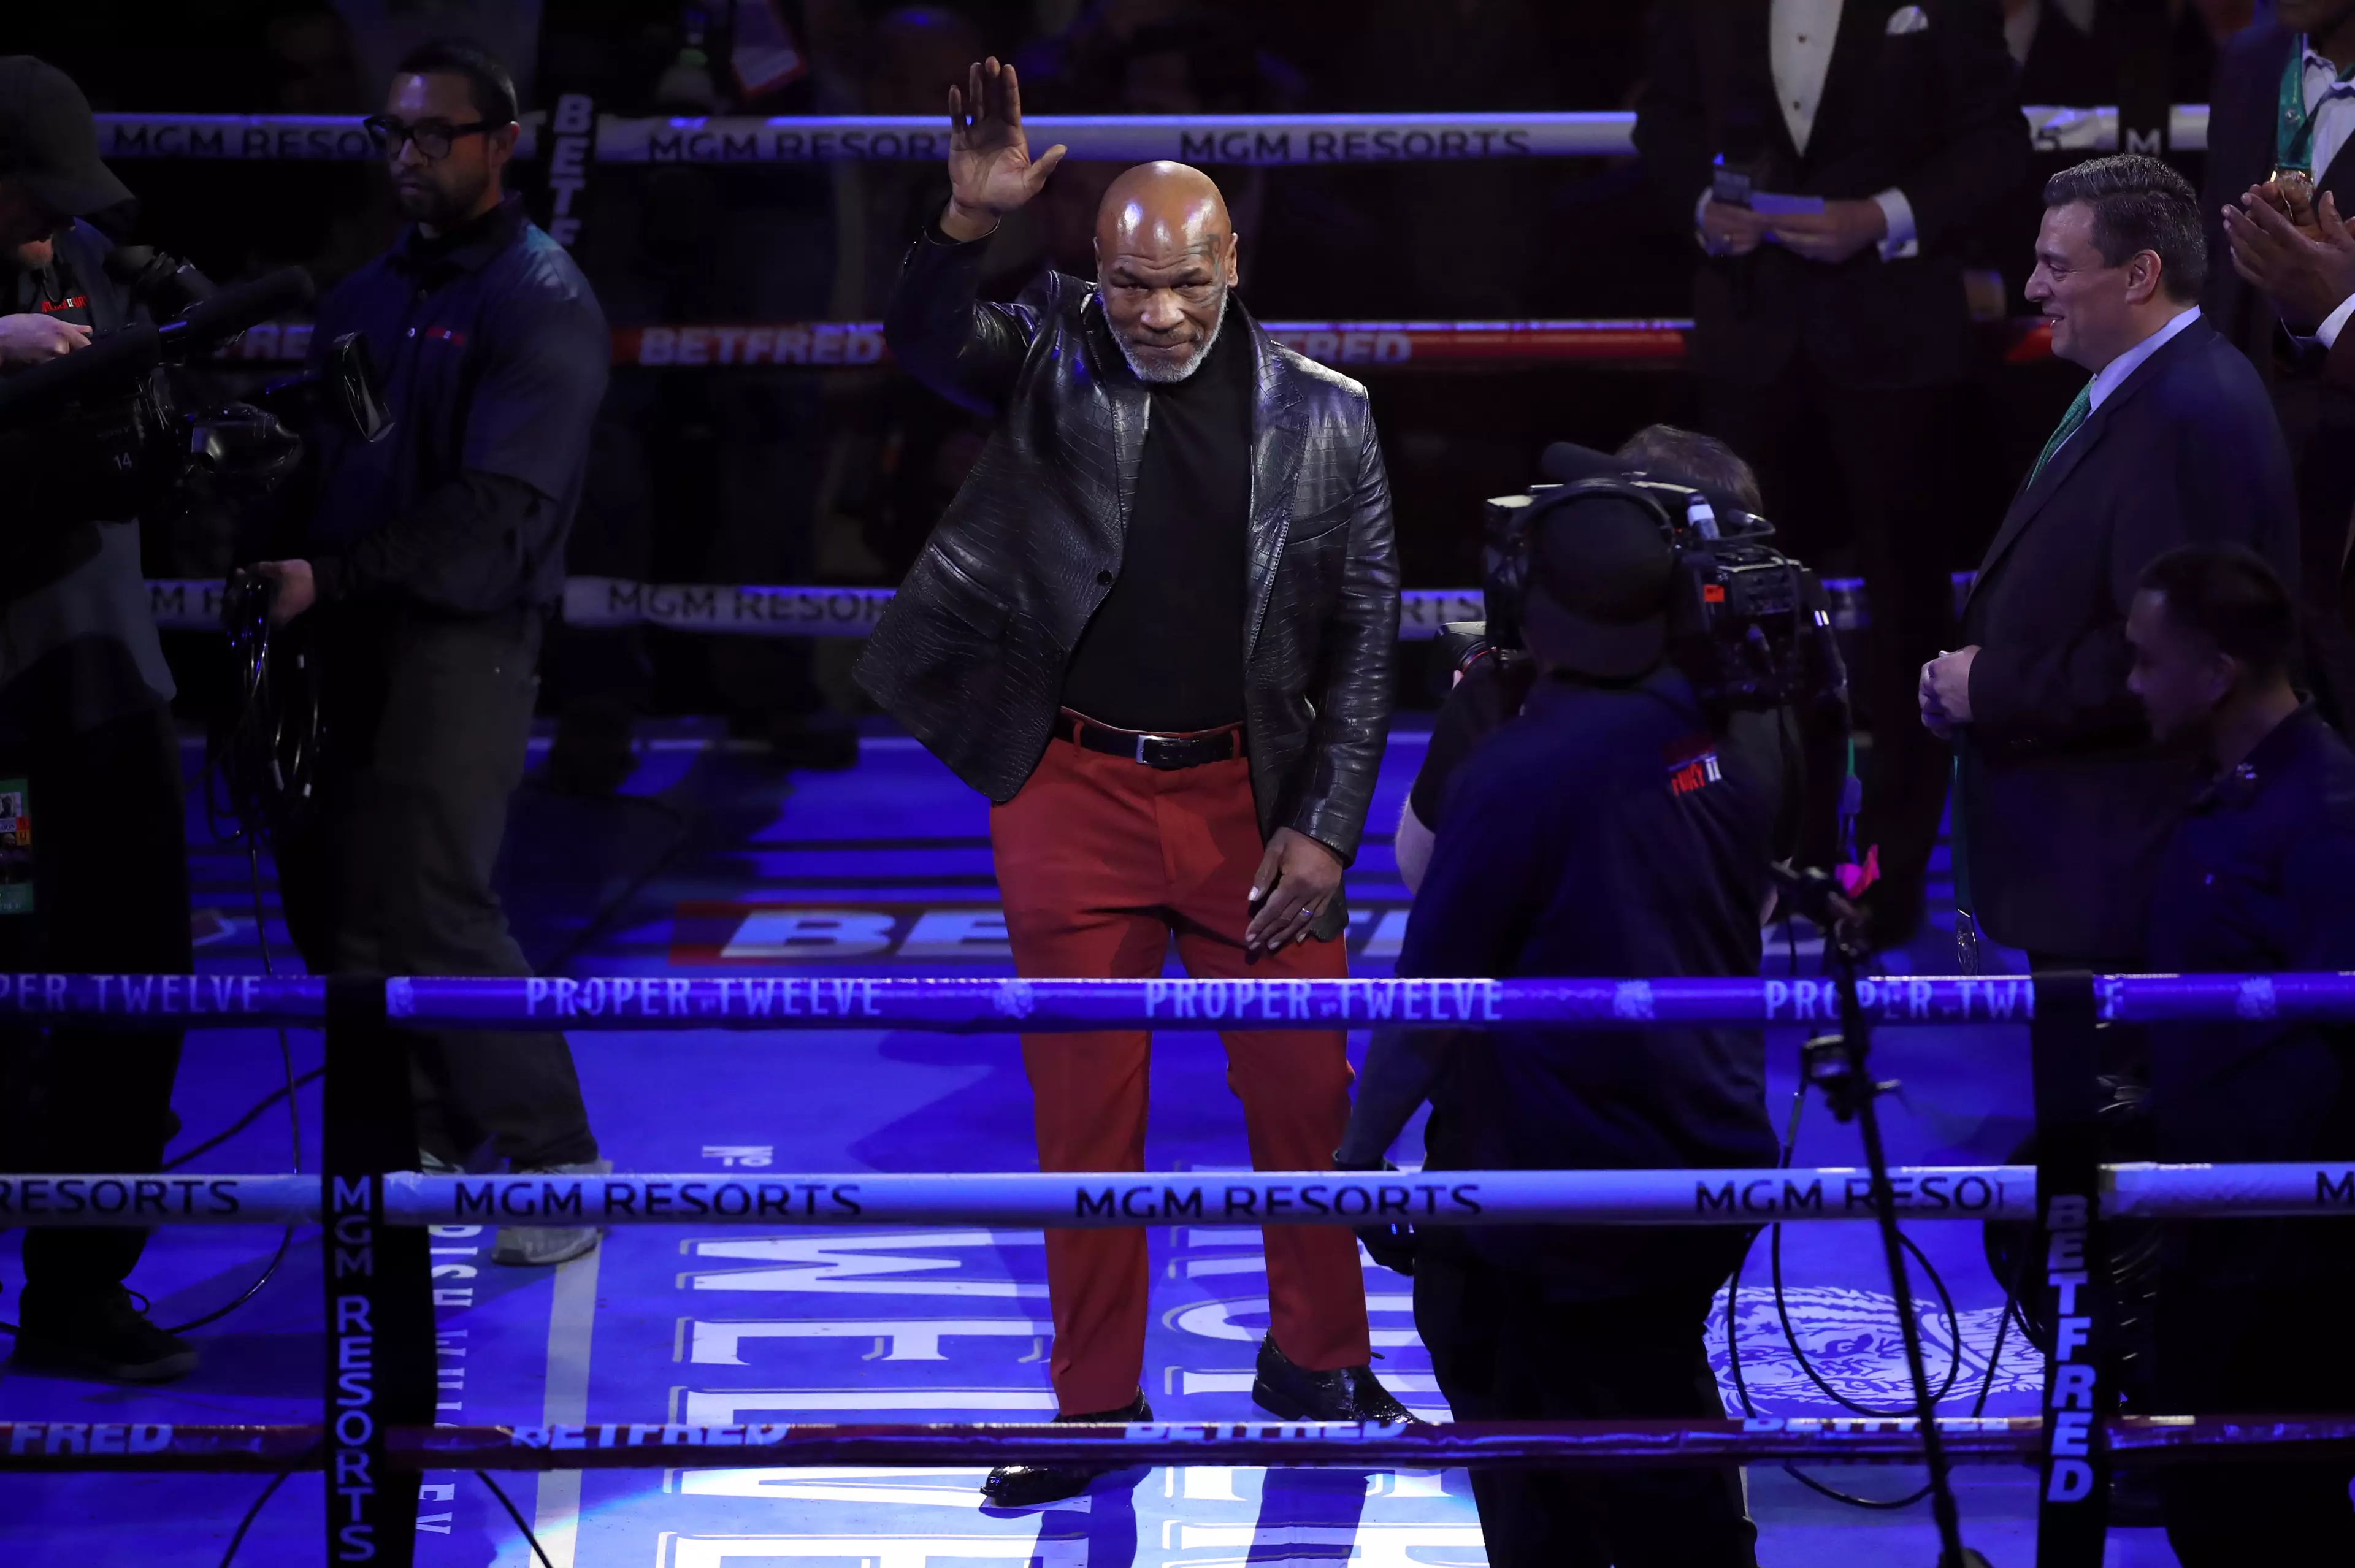 Iron Mike at the MGM Grand earlier this year. Image: PA Images